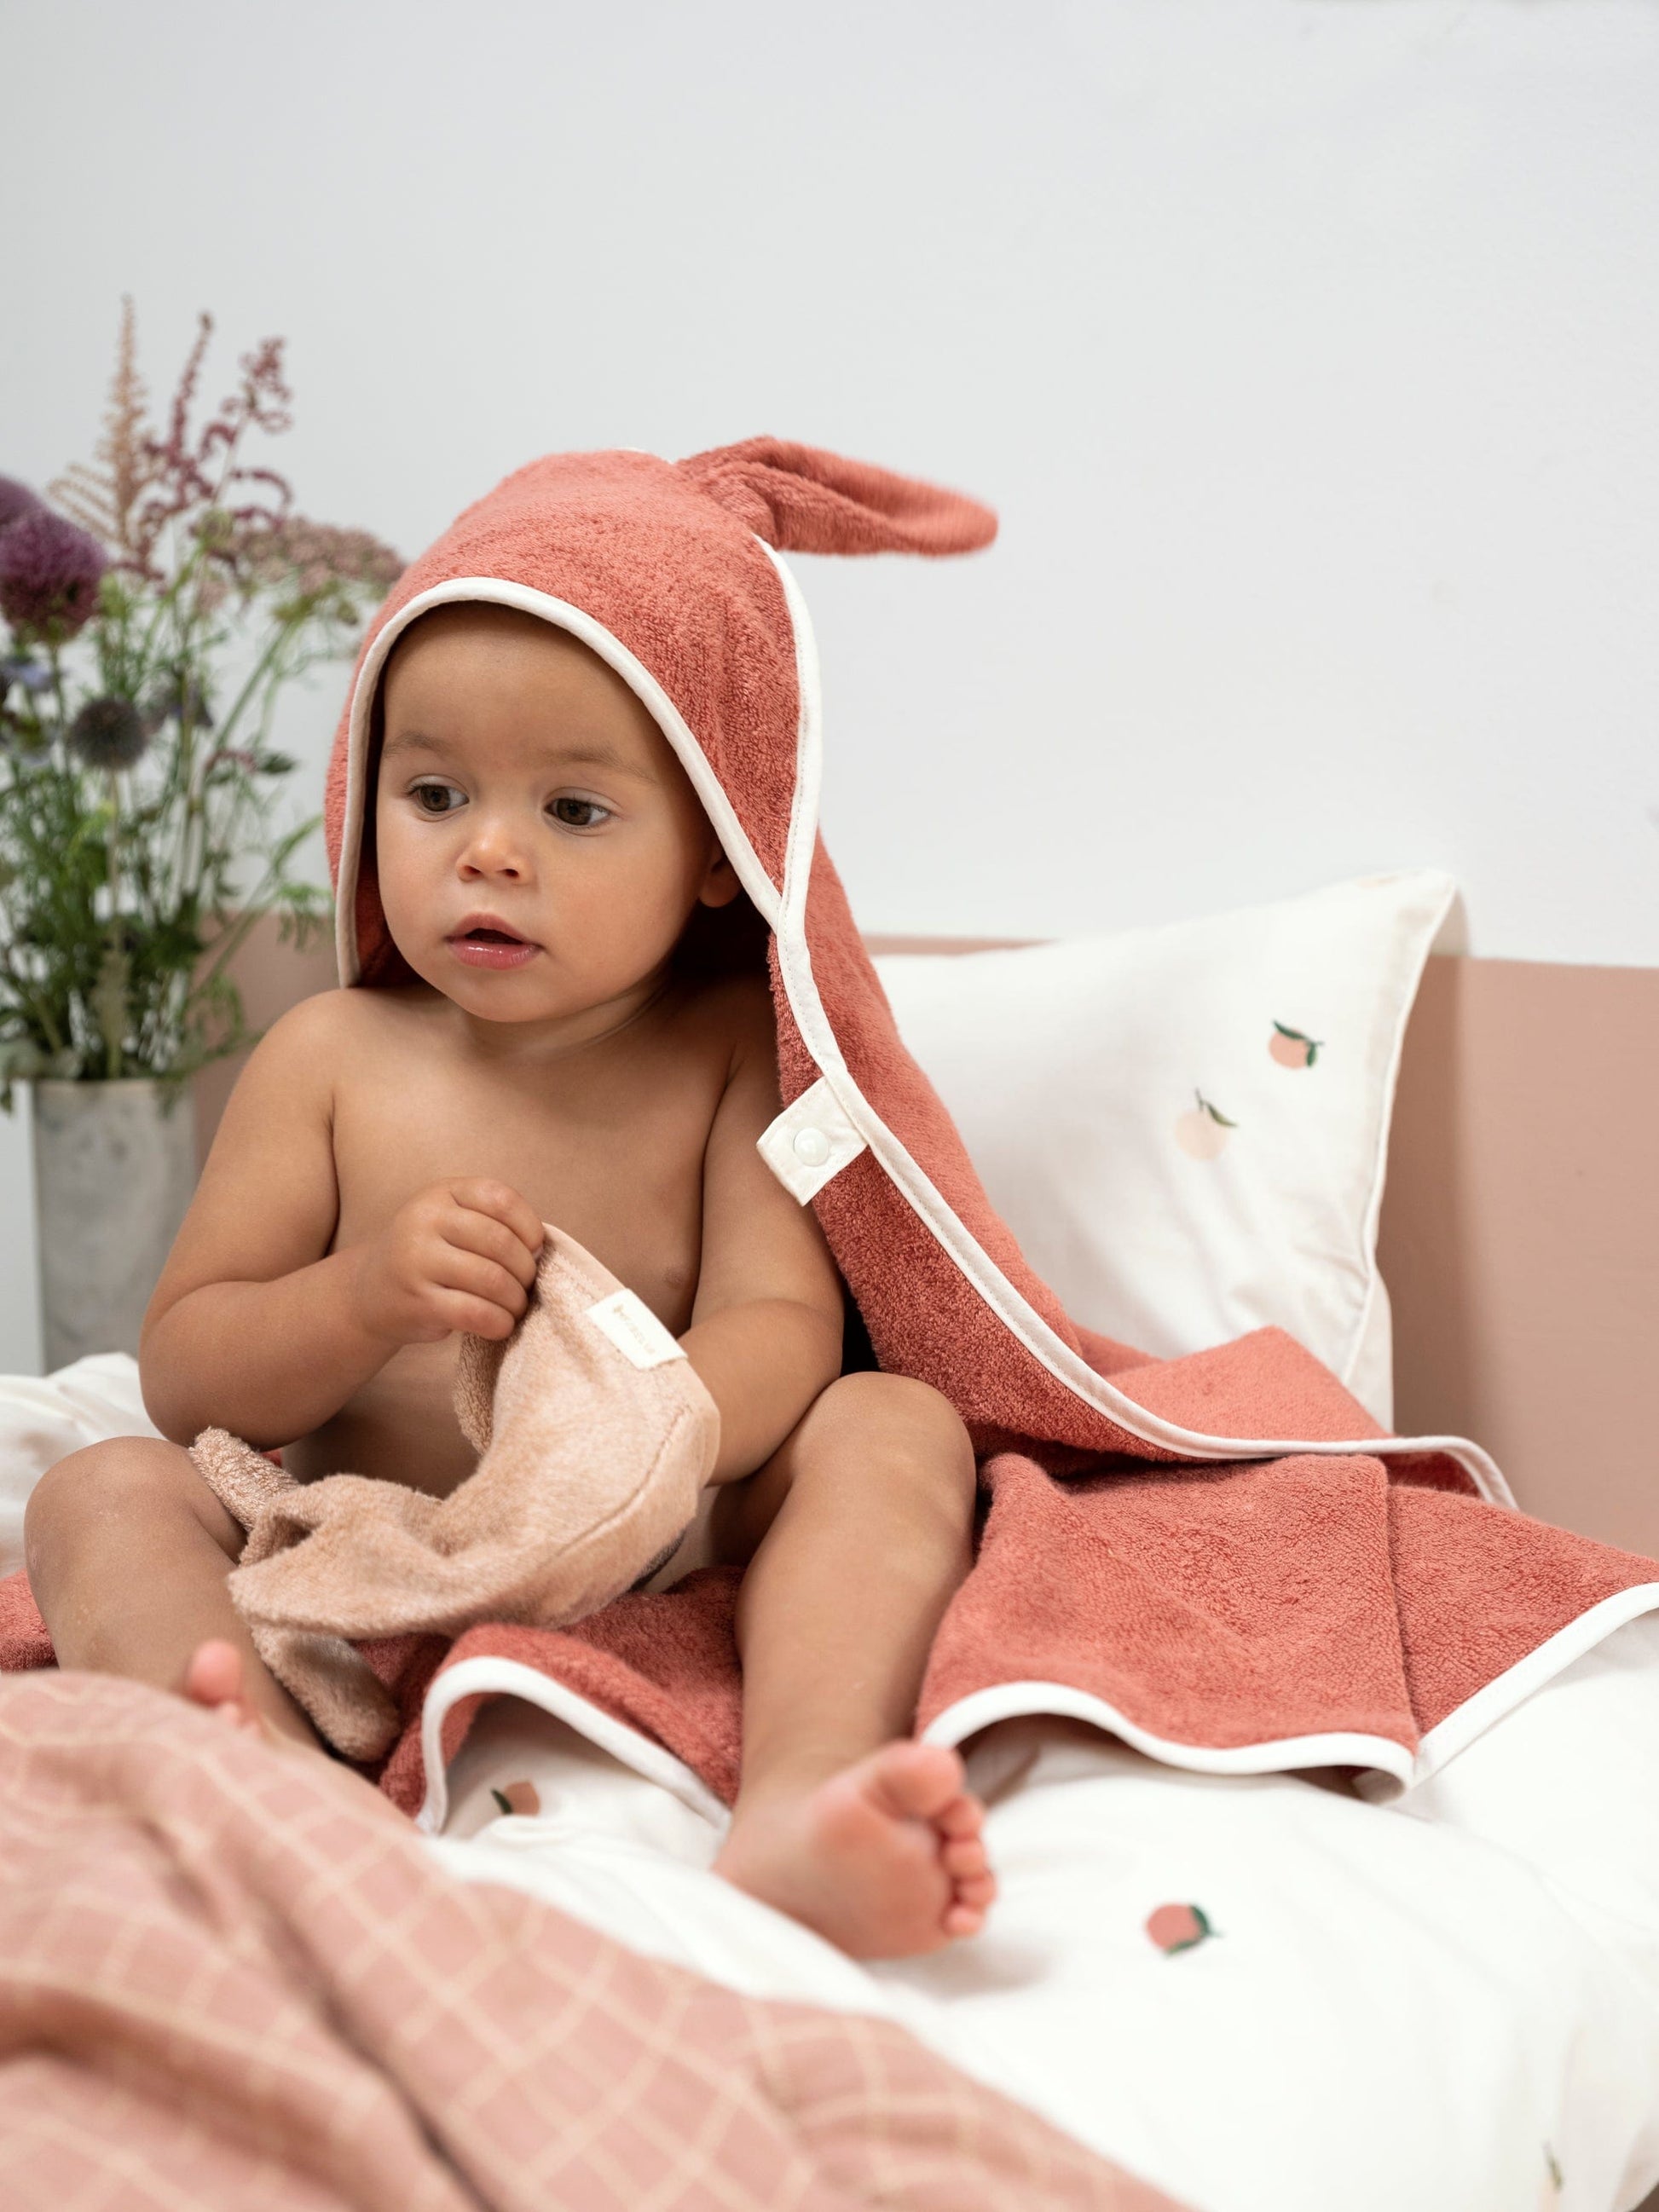 Bunny Bamboo Hooded Towel For Kids By Fabelab Lilac